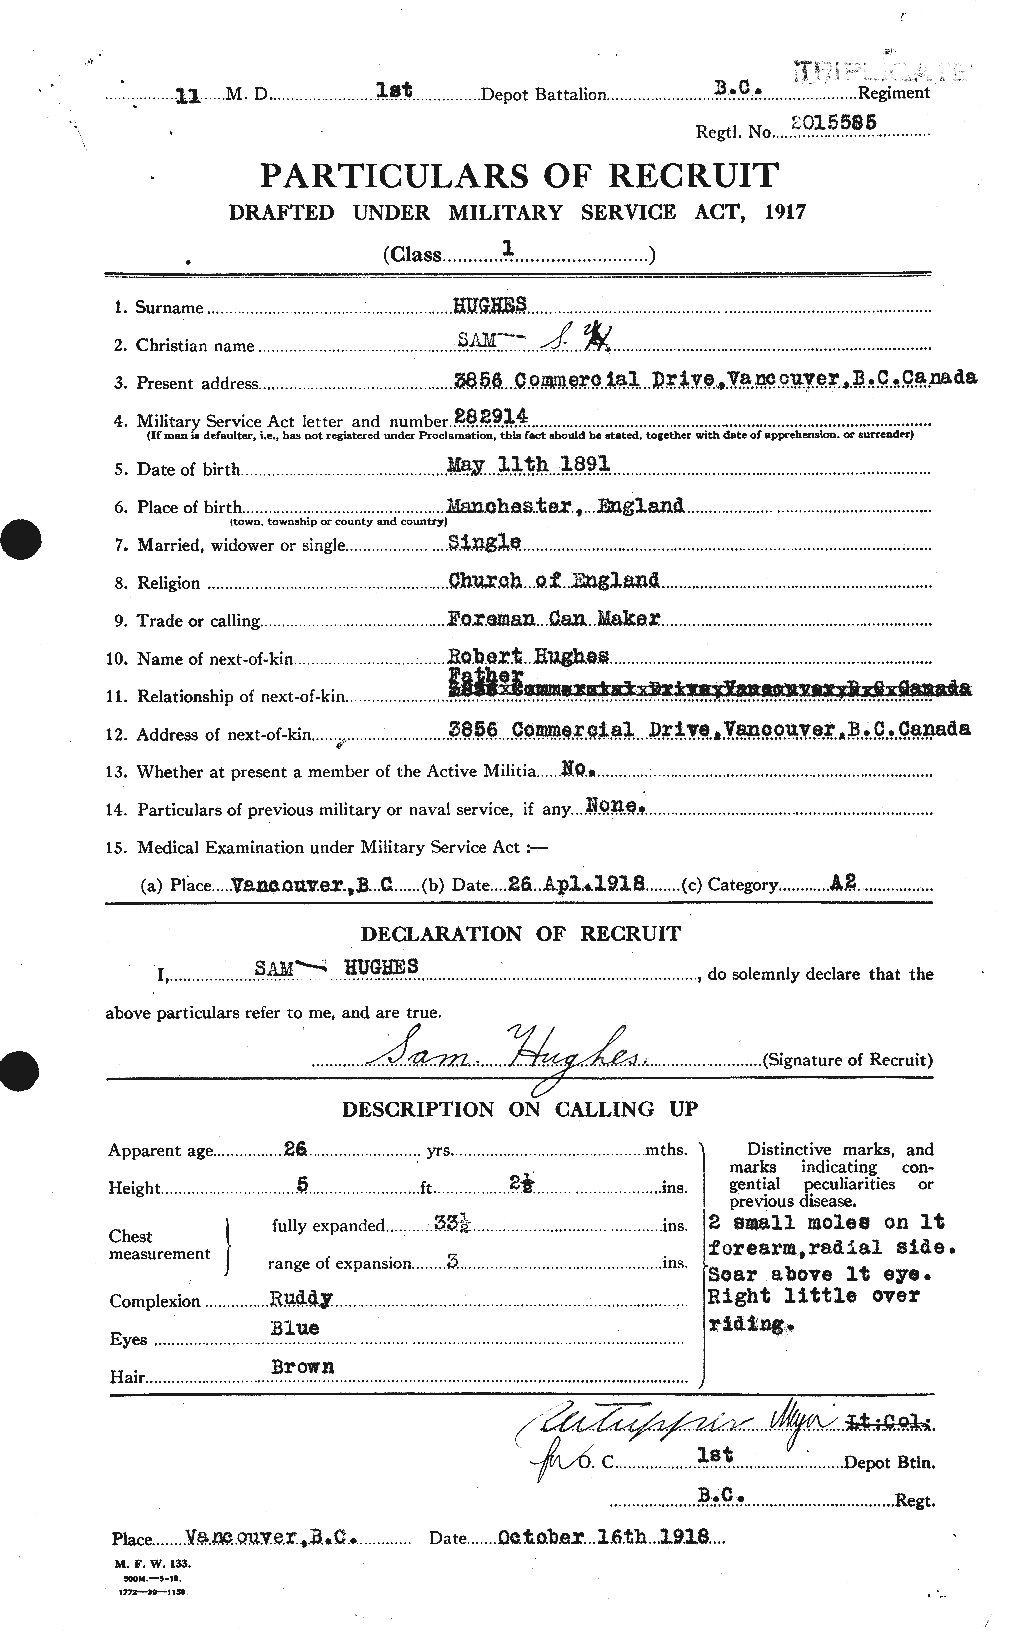 Personnel Records of the First World War - CEF 406632a